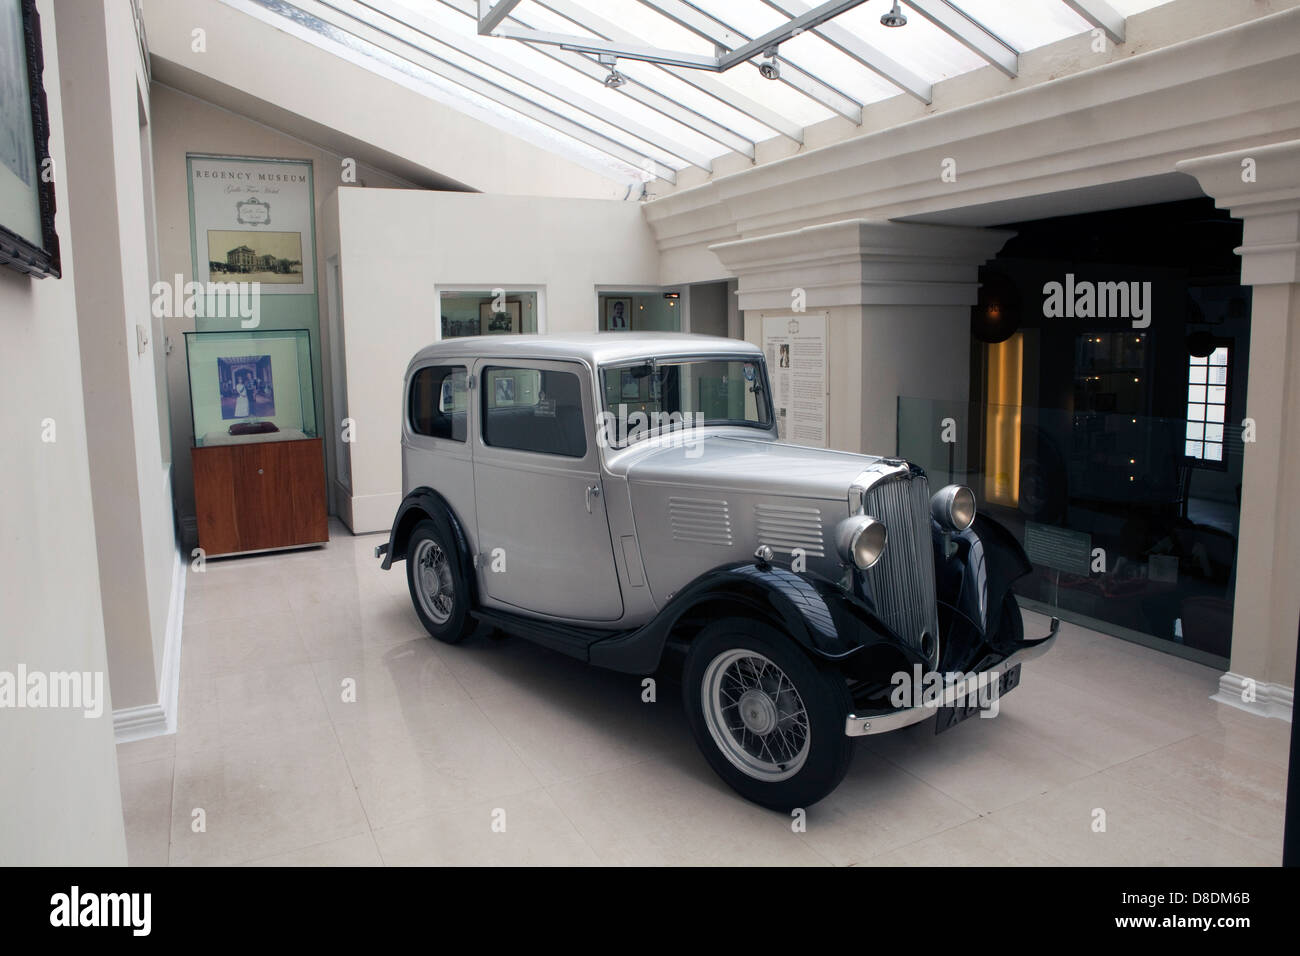 A view of the former car of Prince Philip at the REgency Museum at the Galle Face Hotel in Colombo, Sri Lanka Stock Photo